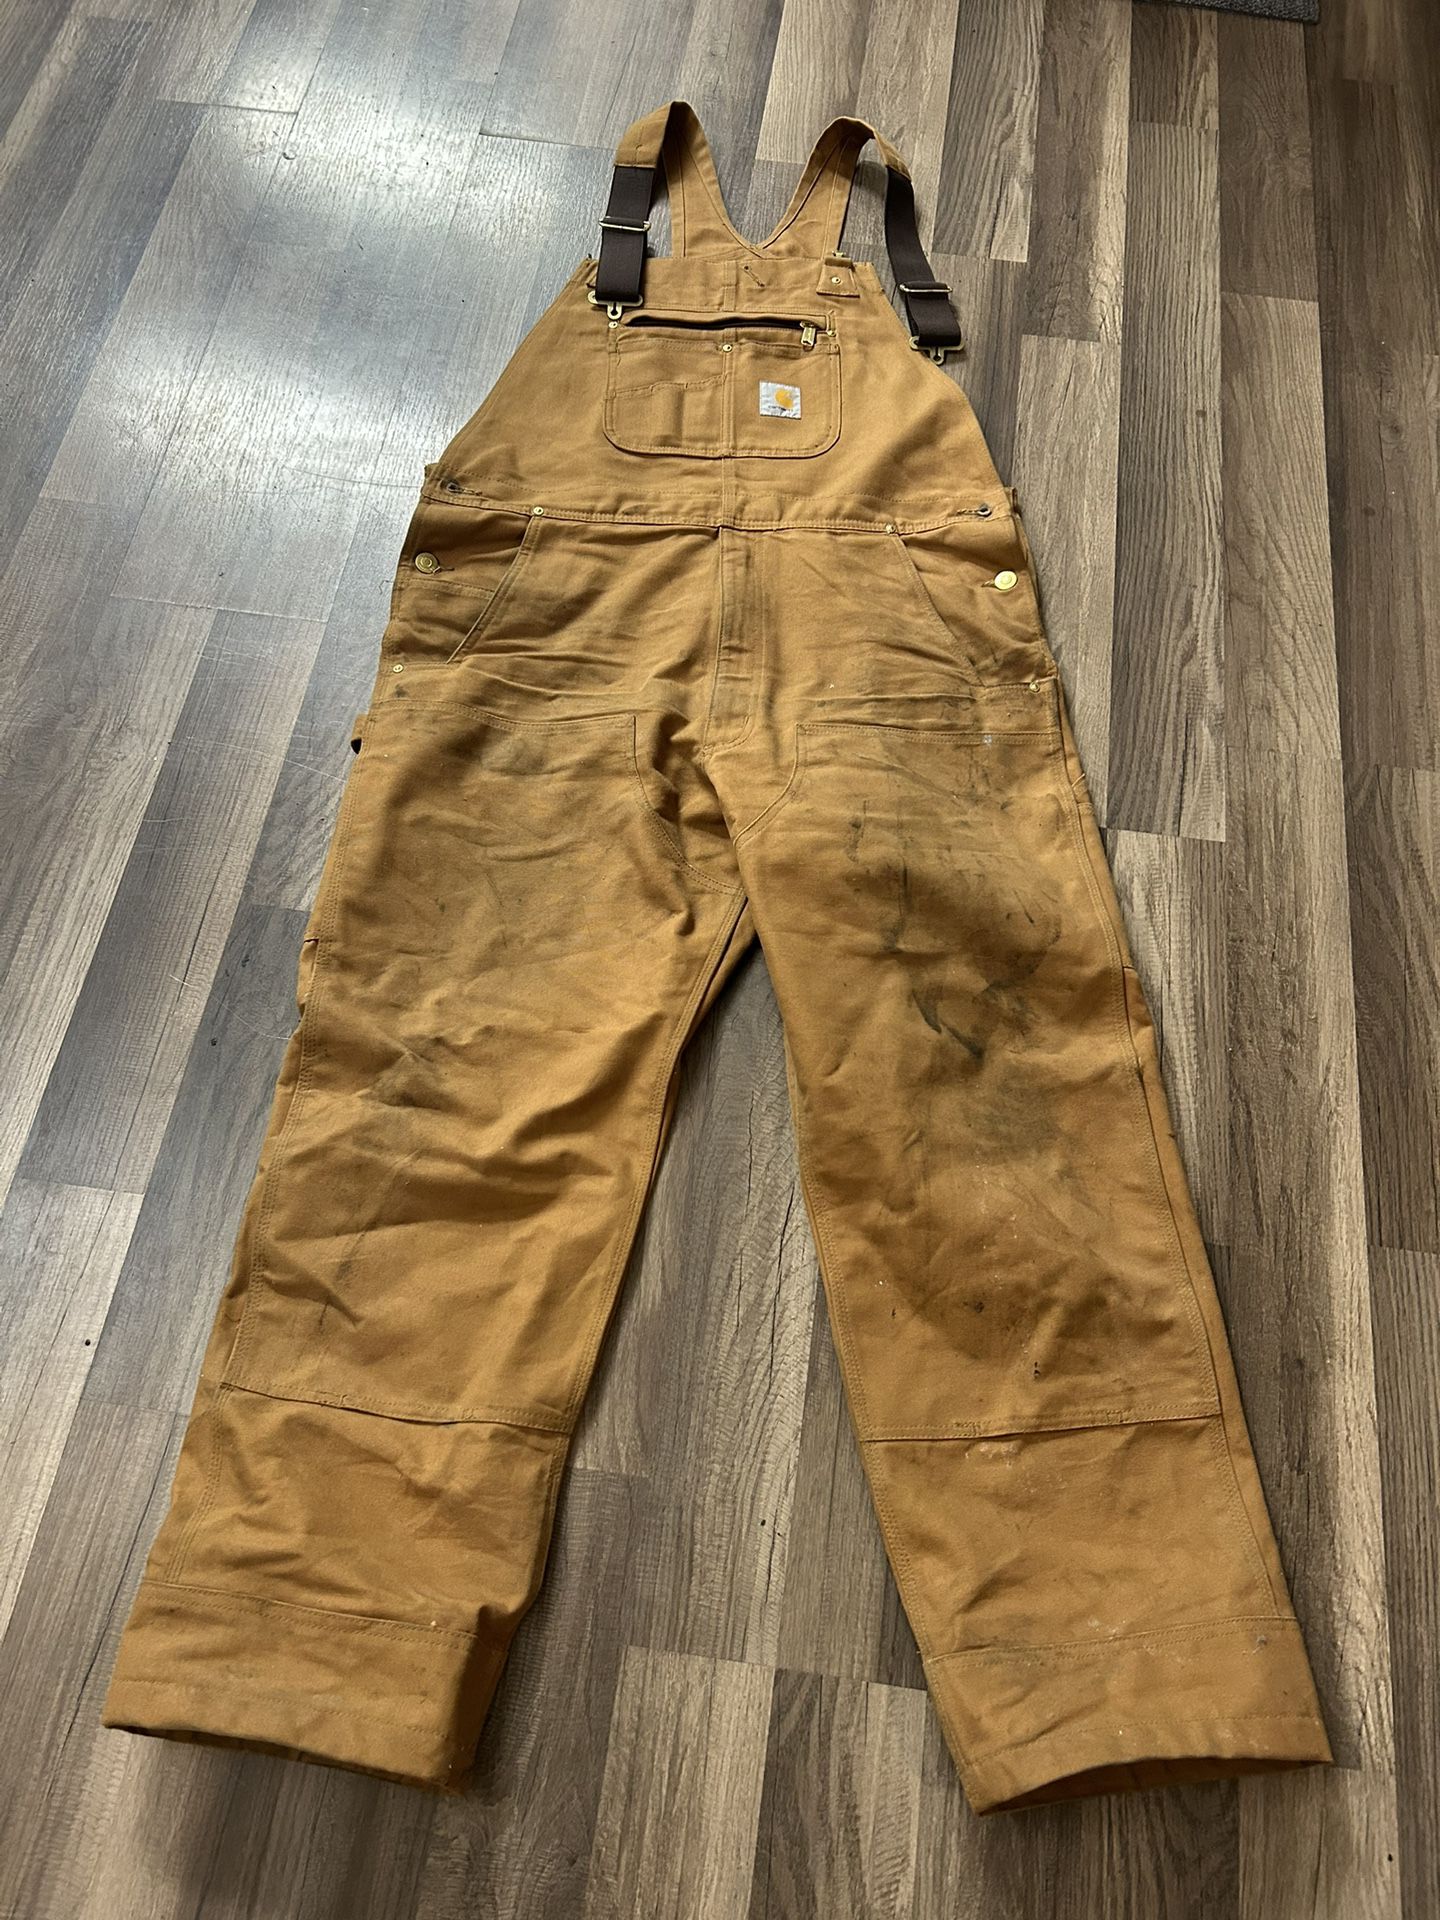 Carhart Overalls for Sale in Auburn, WA - OfferUp